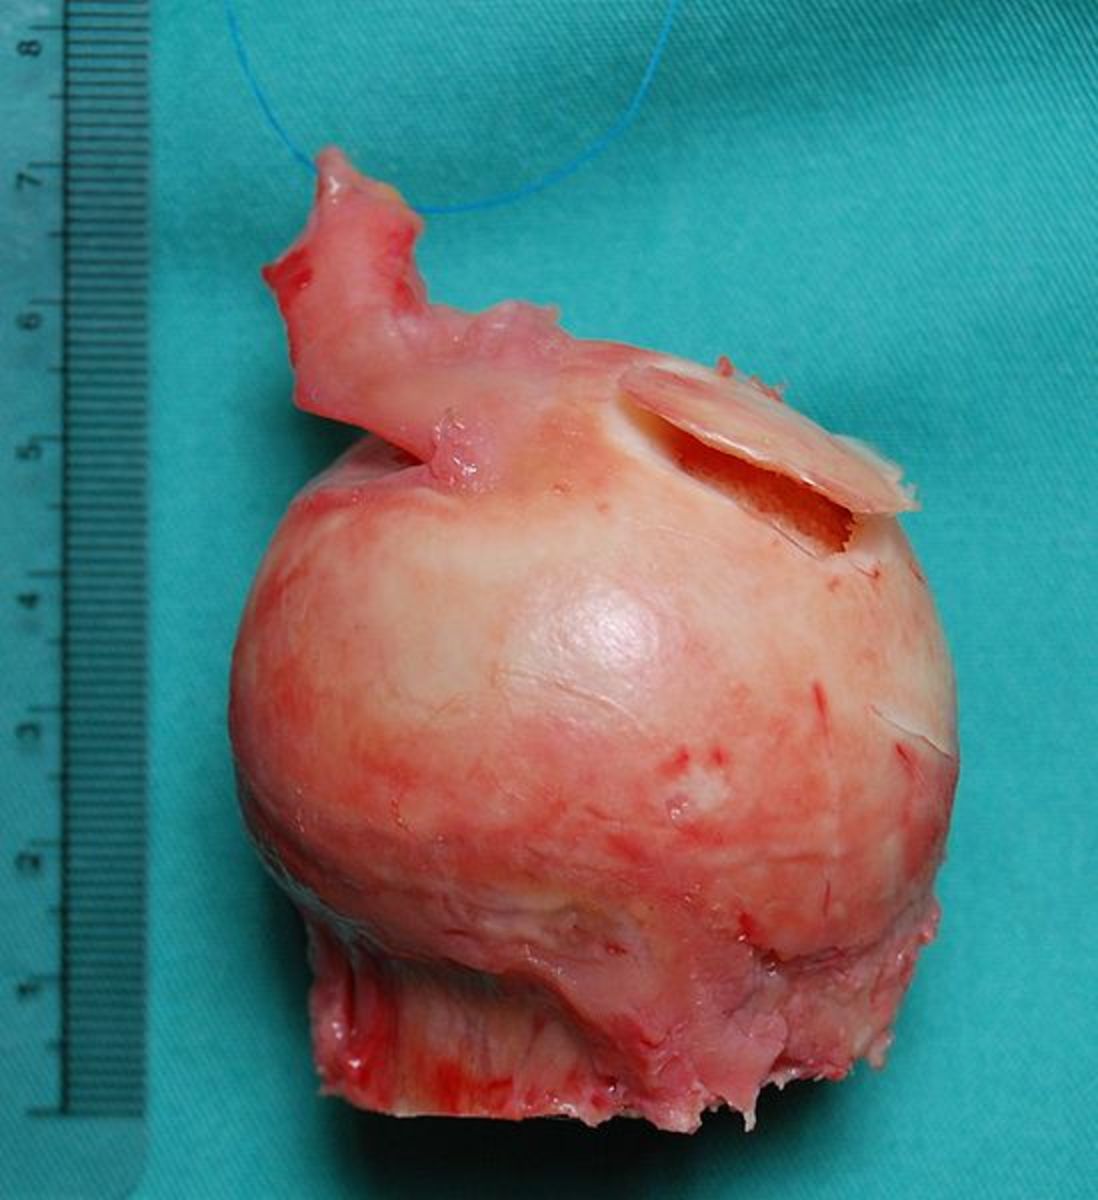 Femoral head affected by avascular necrosis and removed during hip replacement surgery